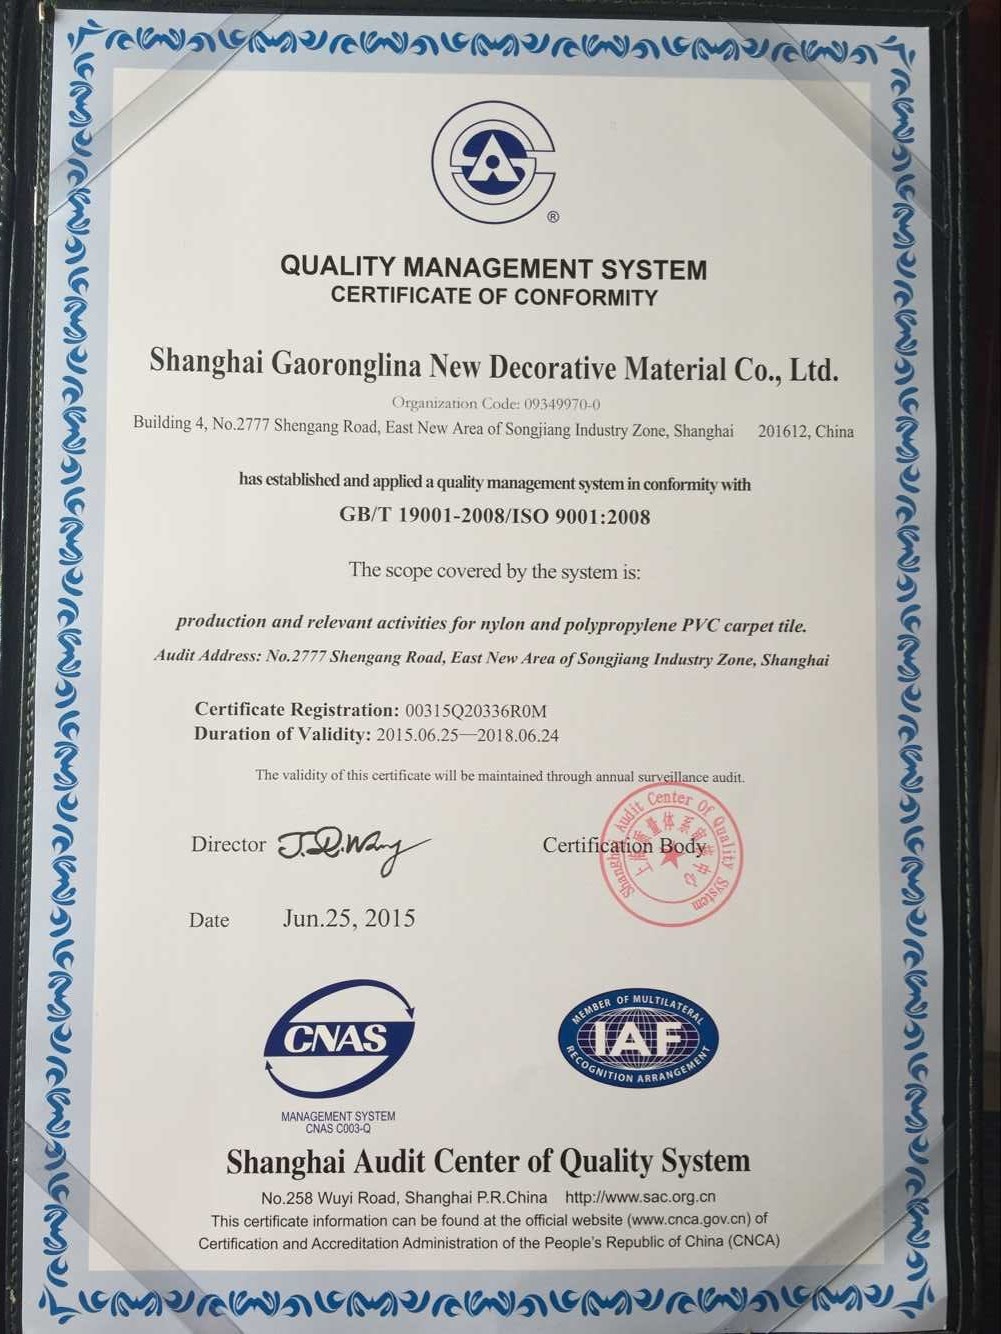 Certificate of ISO9001